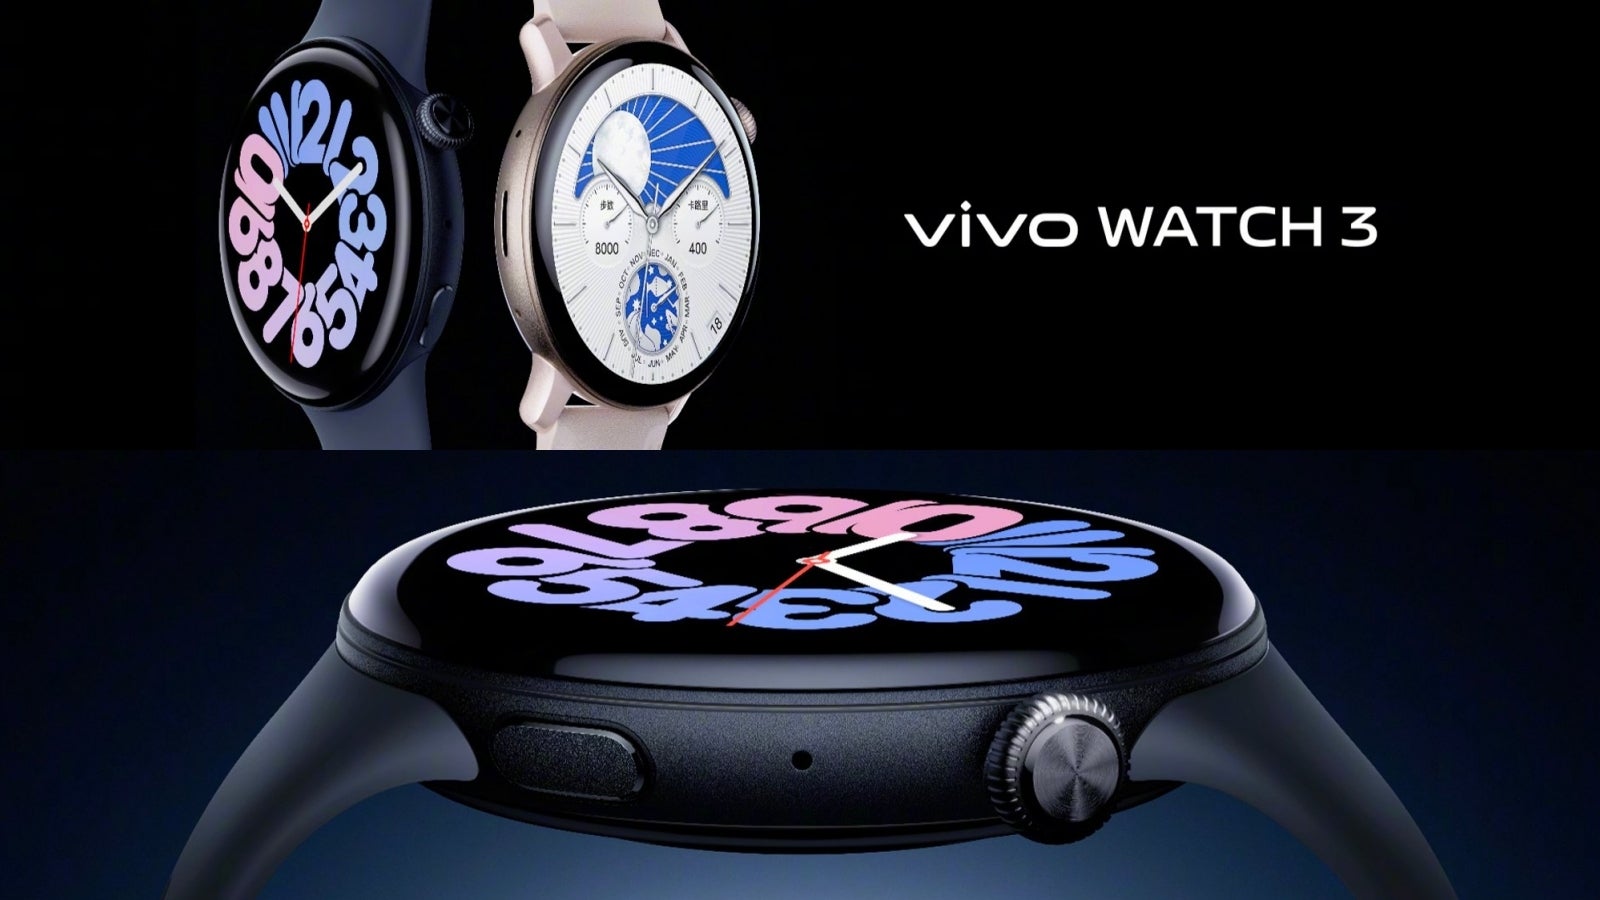 The Vivo Watch 3 is a better looking Pixel Watch 2. - I have an iPhone and I love the Pixel Watch 2 but Google must try (even) harder